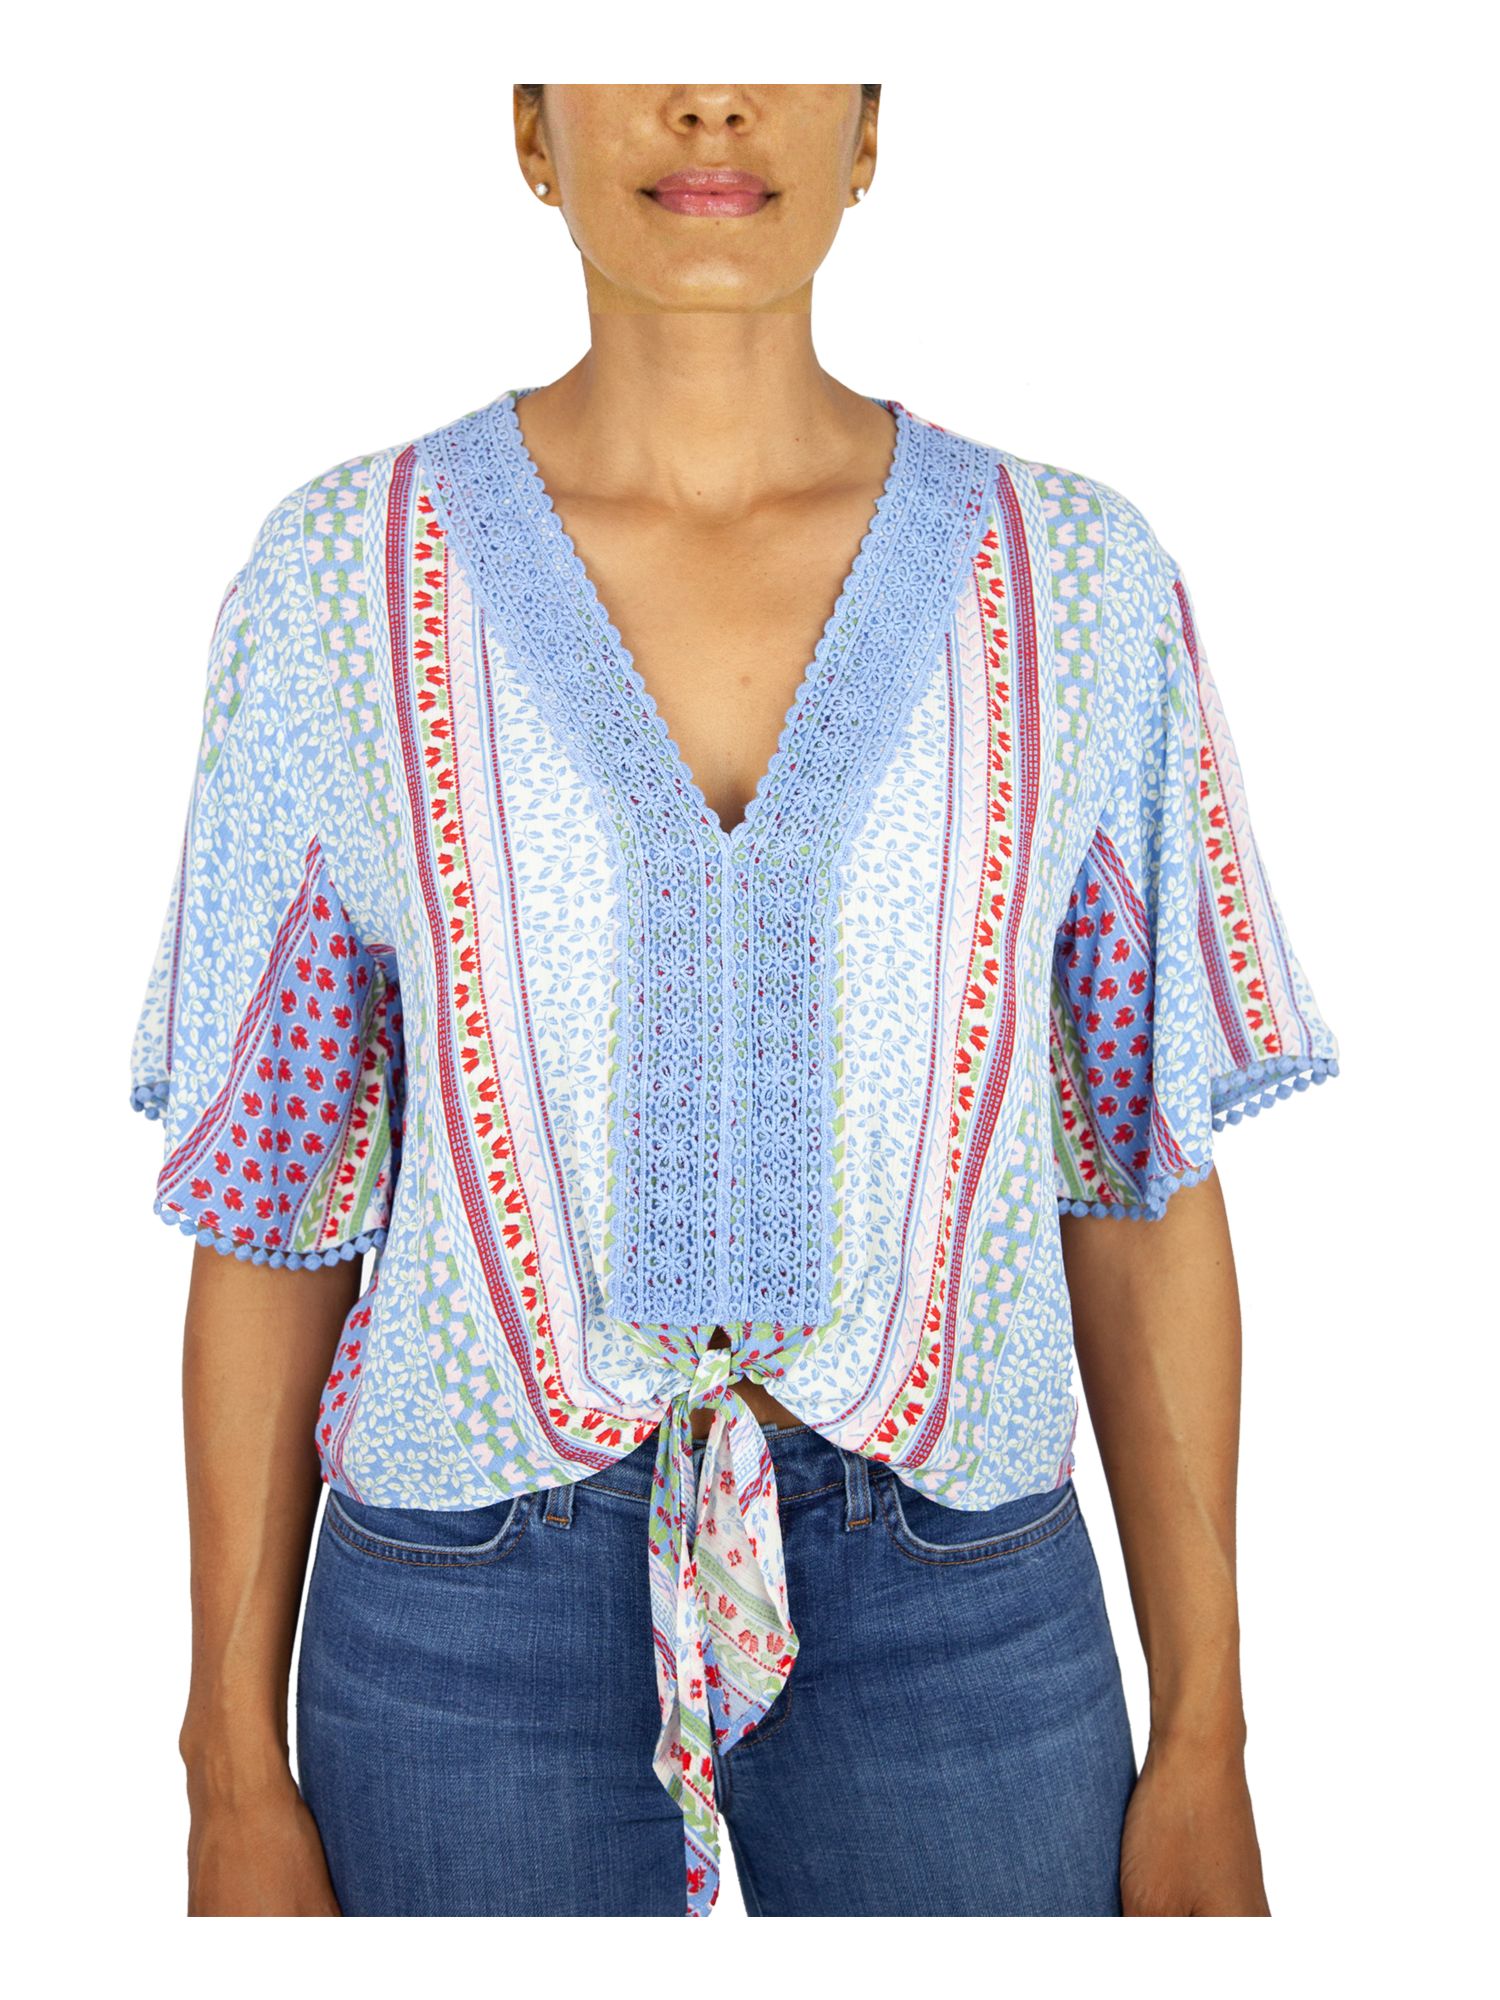 GYPSIES & MOONDUST Womens Light Blue Lace Tie-front Printed Short Sleeve V Neck Top Juniors XS